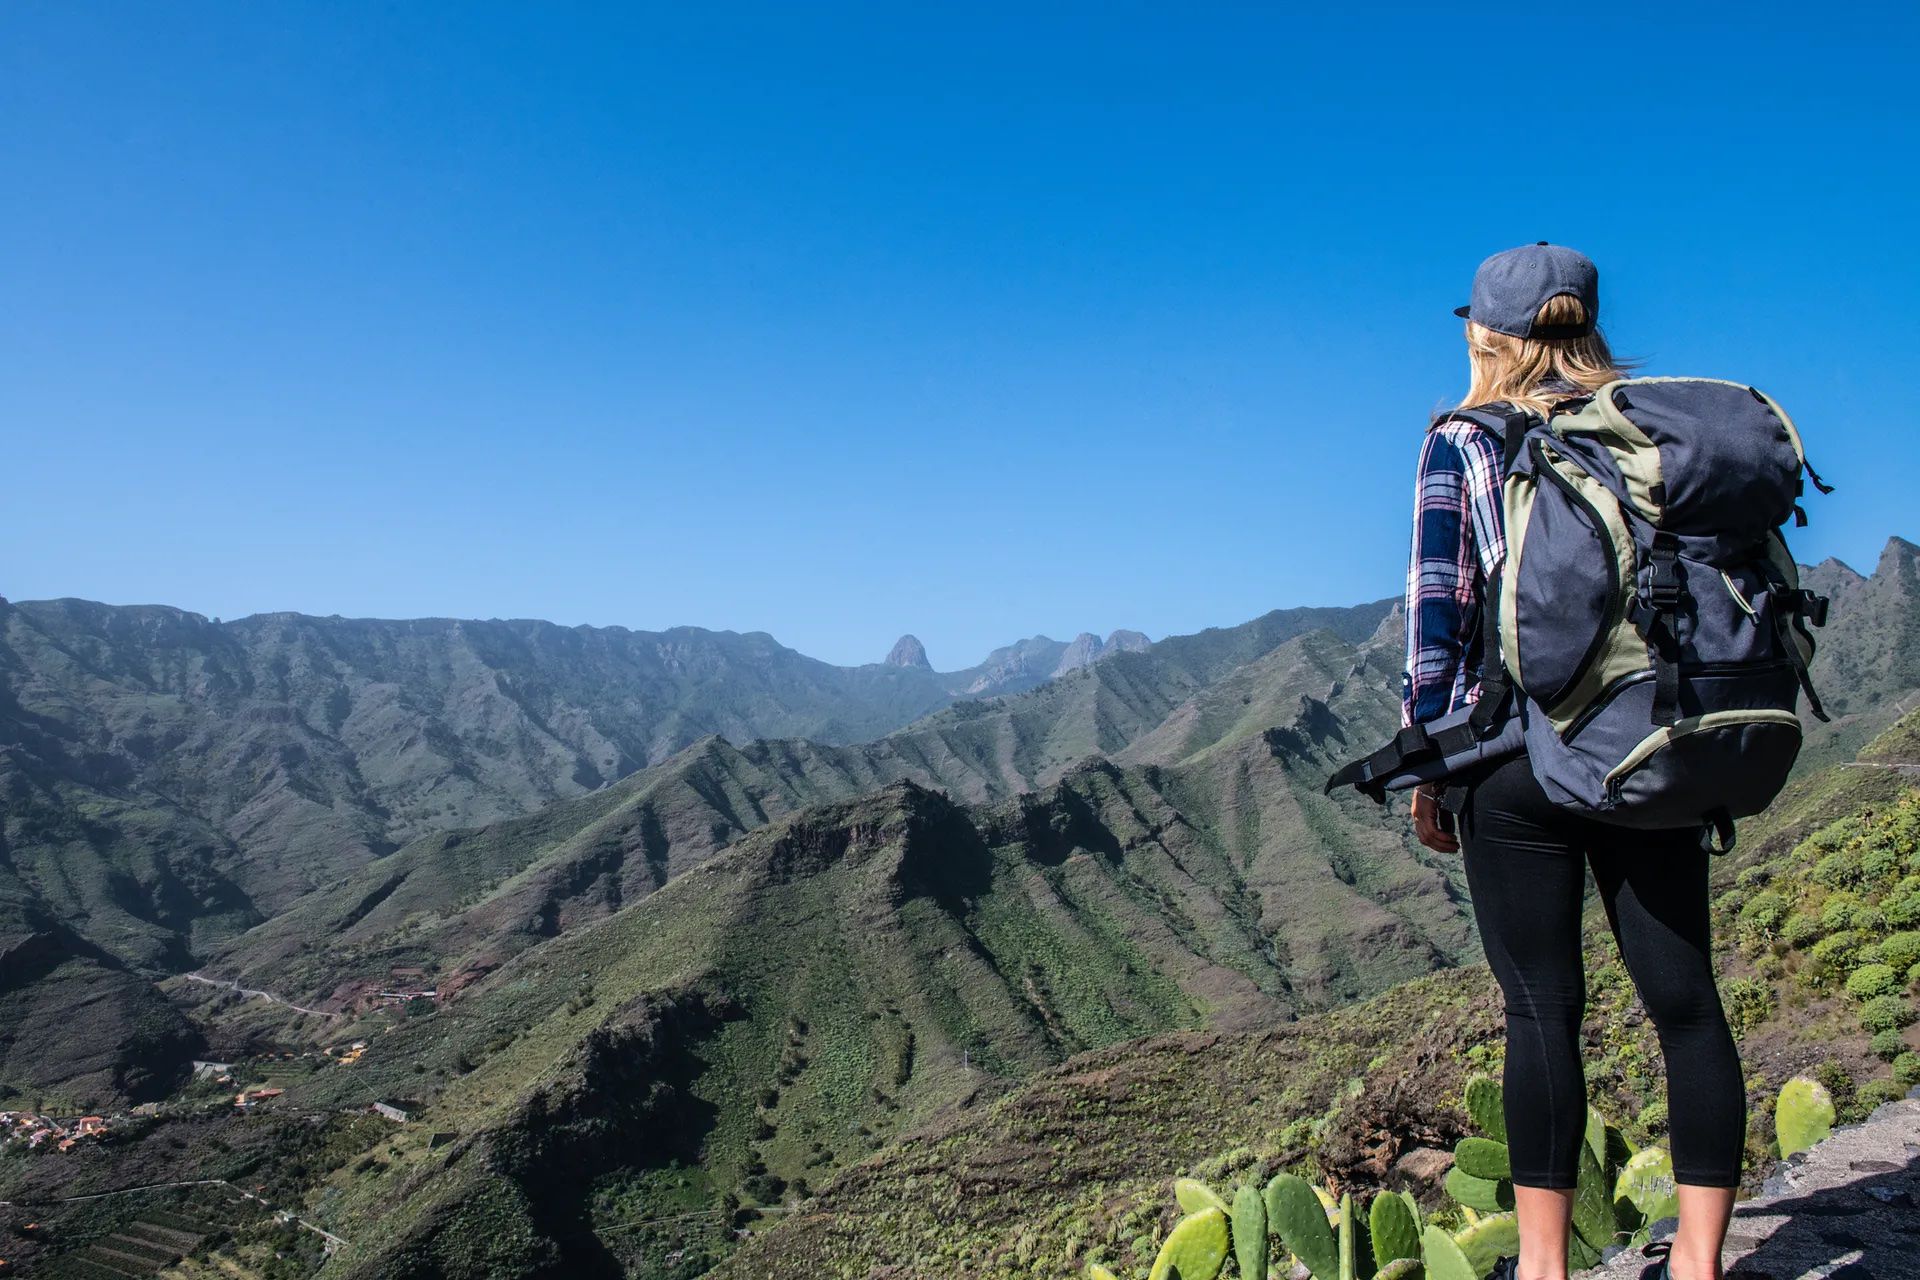 Female hiker in Gran Canaria, with Pico de Las Nieves in the background.